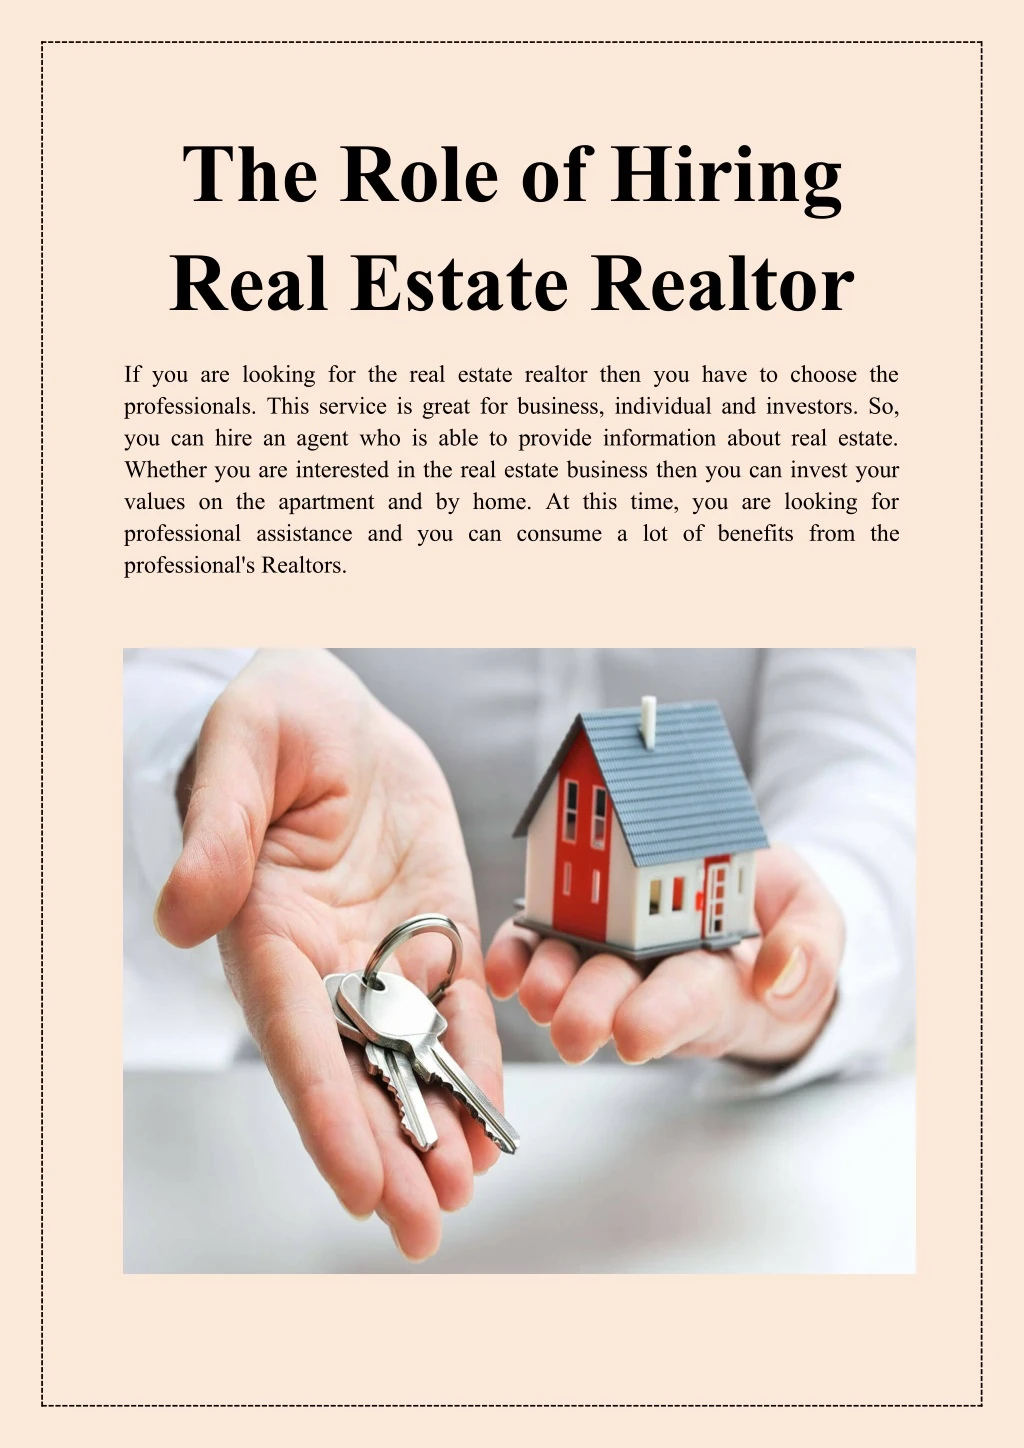 the role of hiring real estate realtor